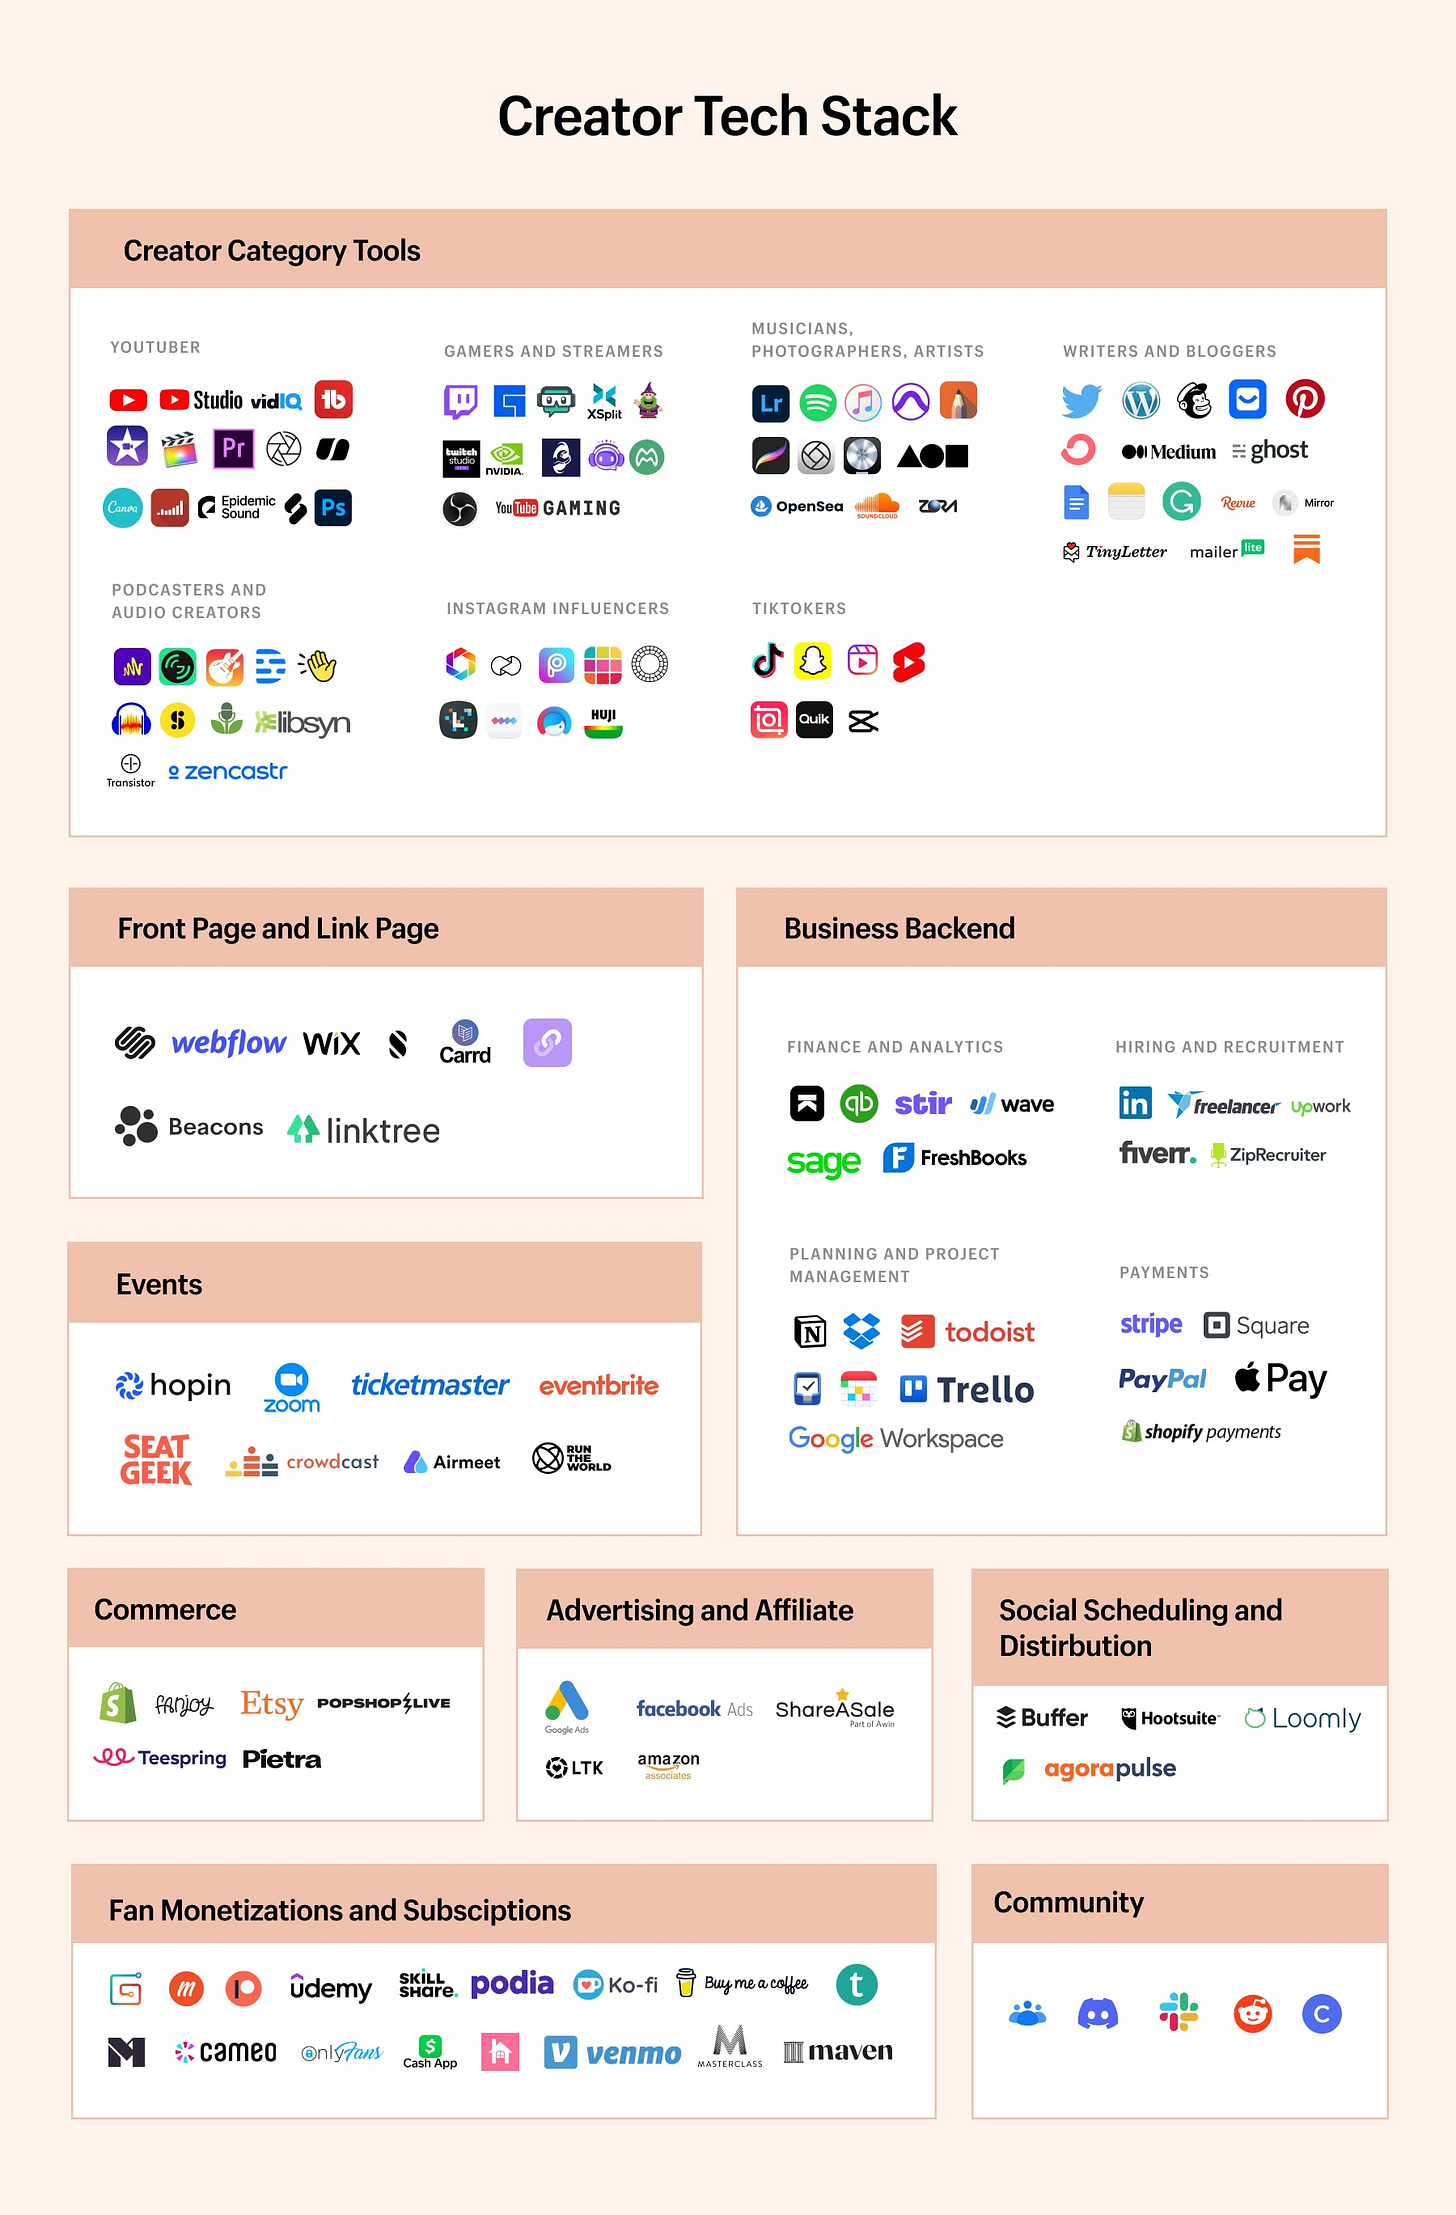 The creator economy tech stack table